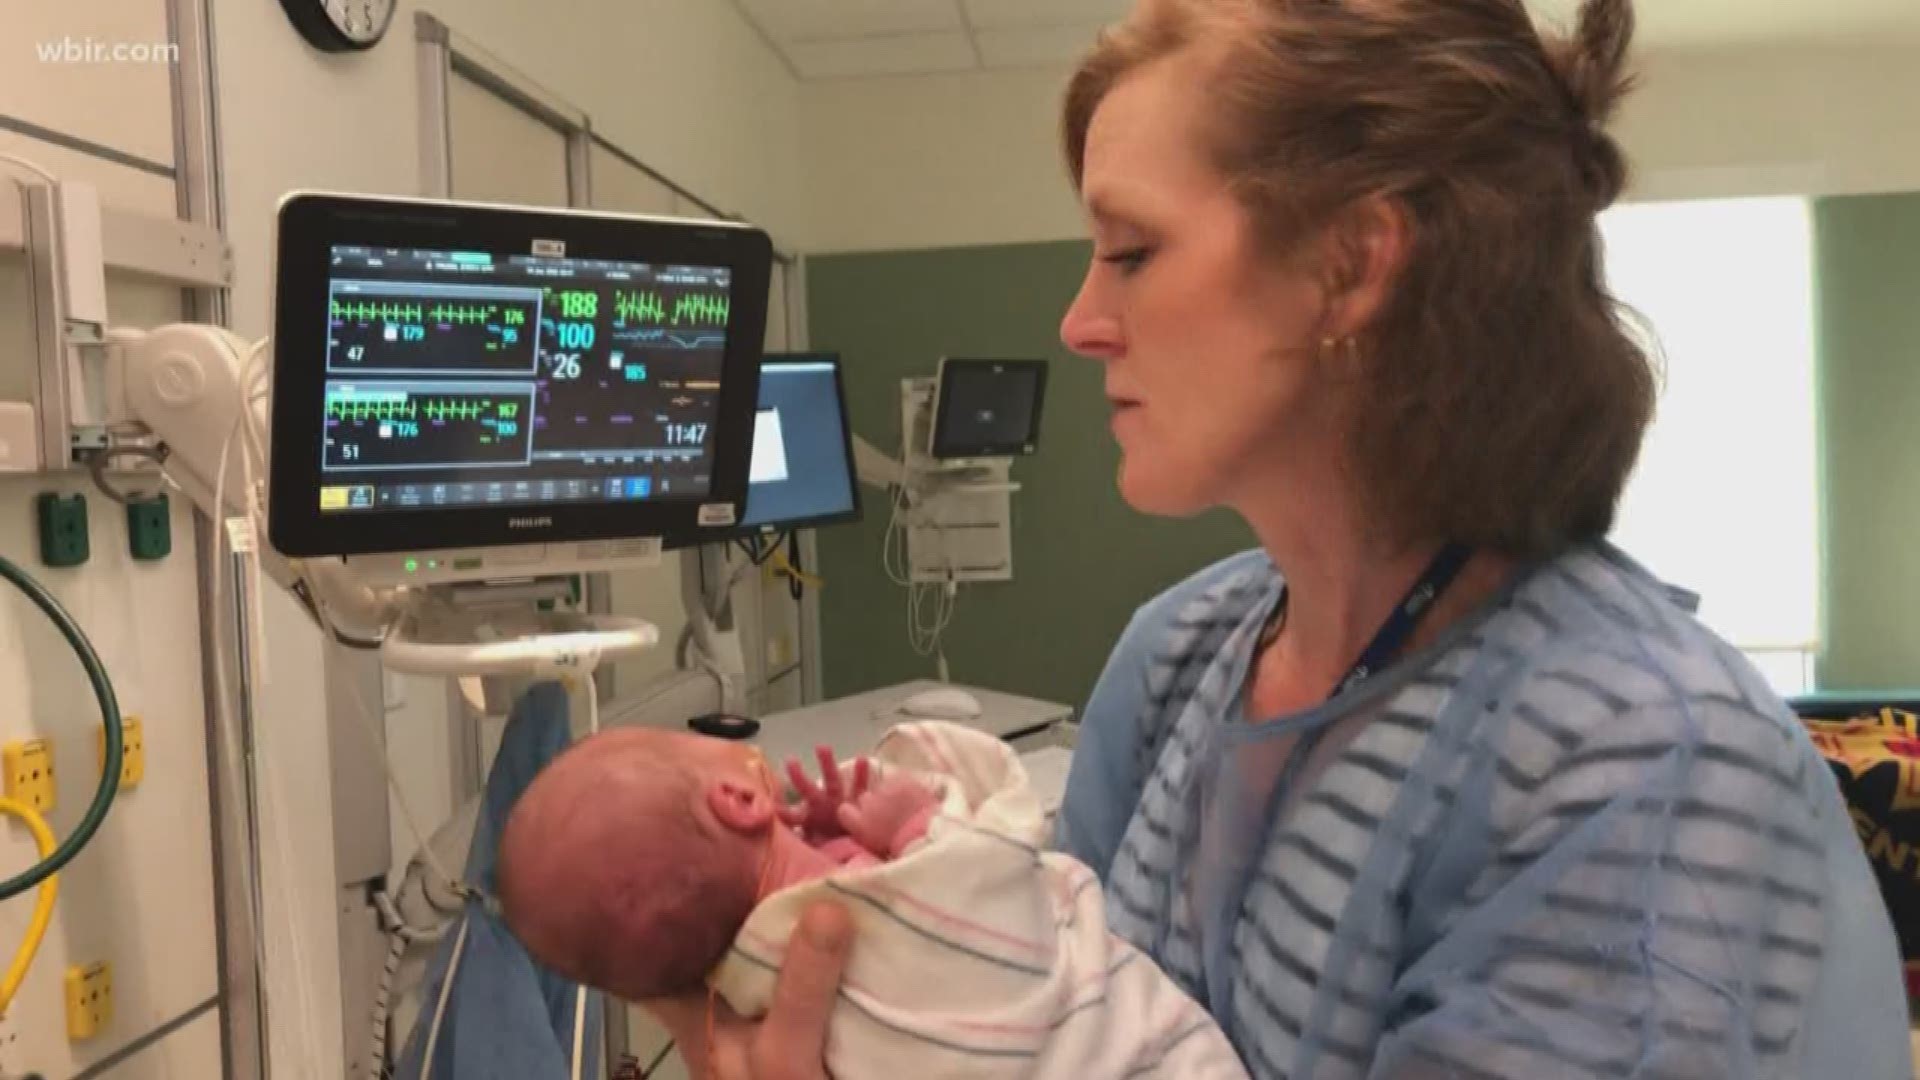 New research shows just how magical music can be for premature babies.